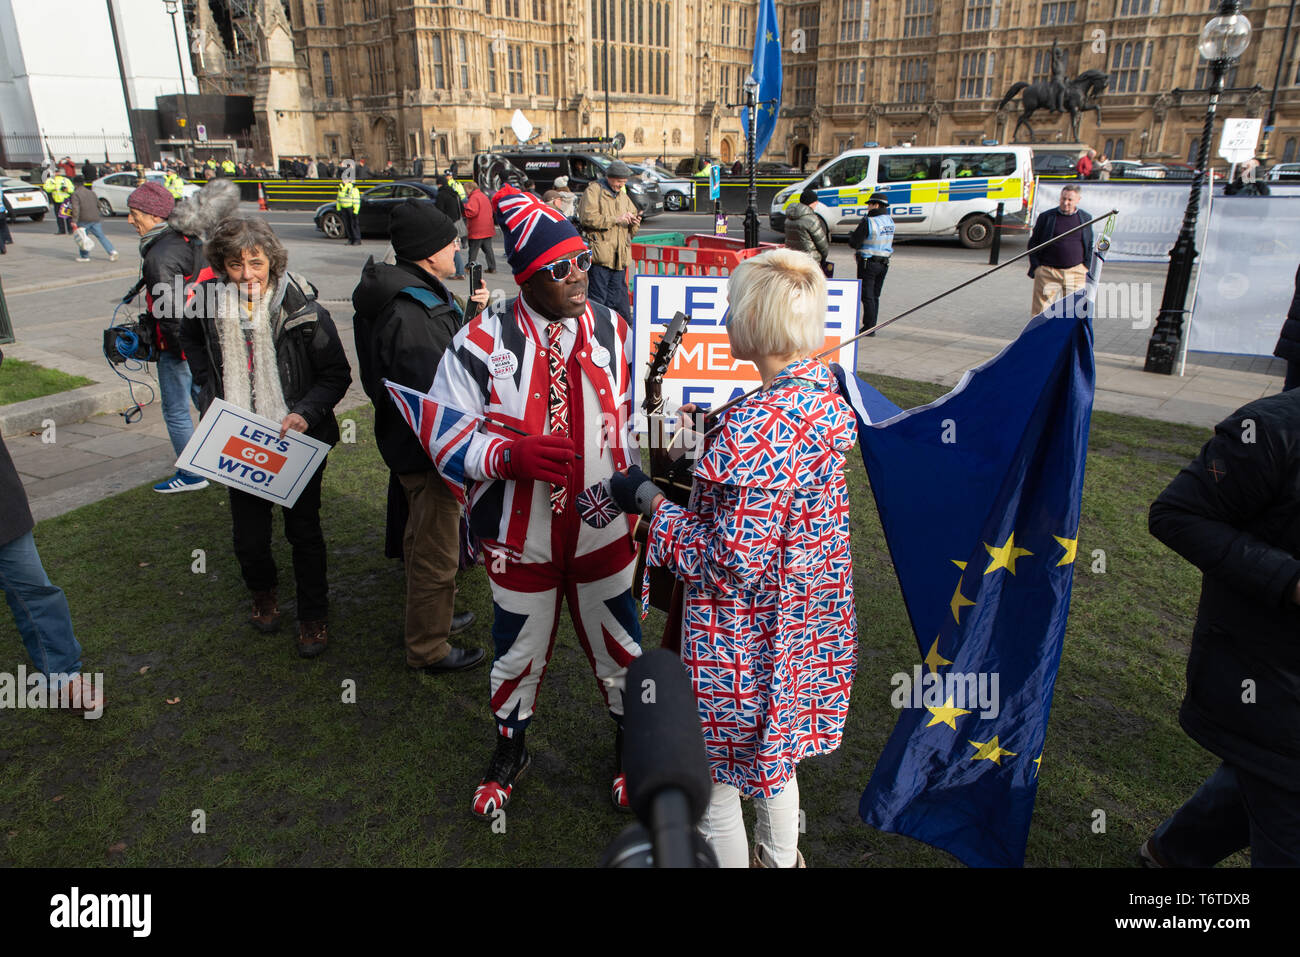 Joseph Afrane, 55, security agent and pro-Brexit, talks with Madeleina Kay, political activist, artist and Remainer, Westminster, London. Jan. 2019 Stock Photo